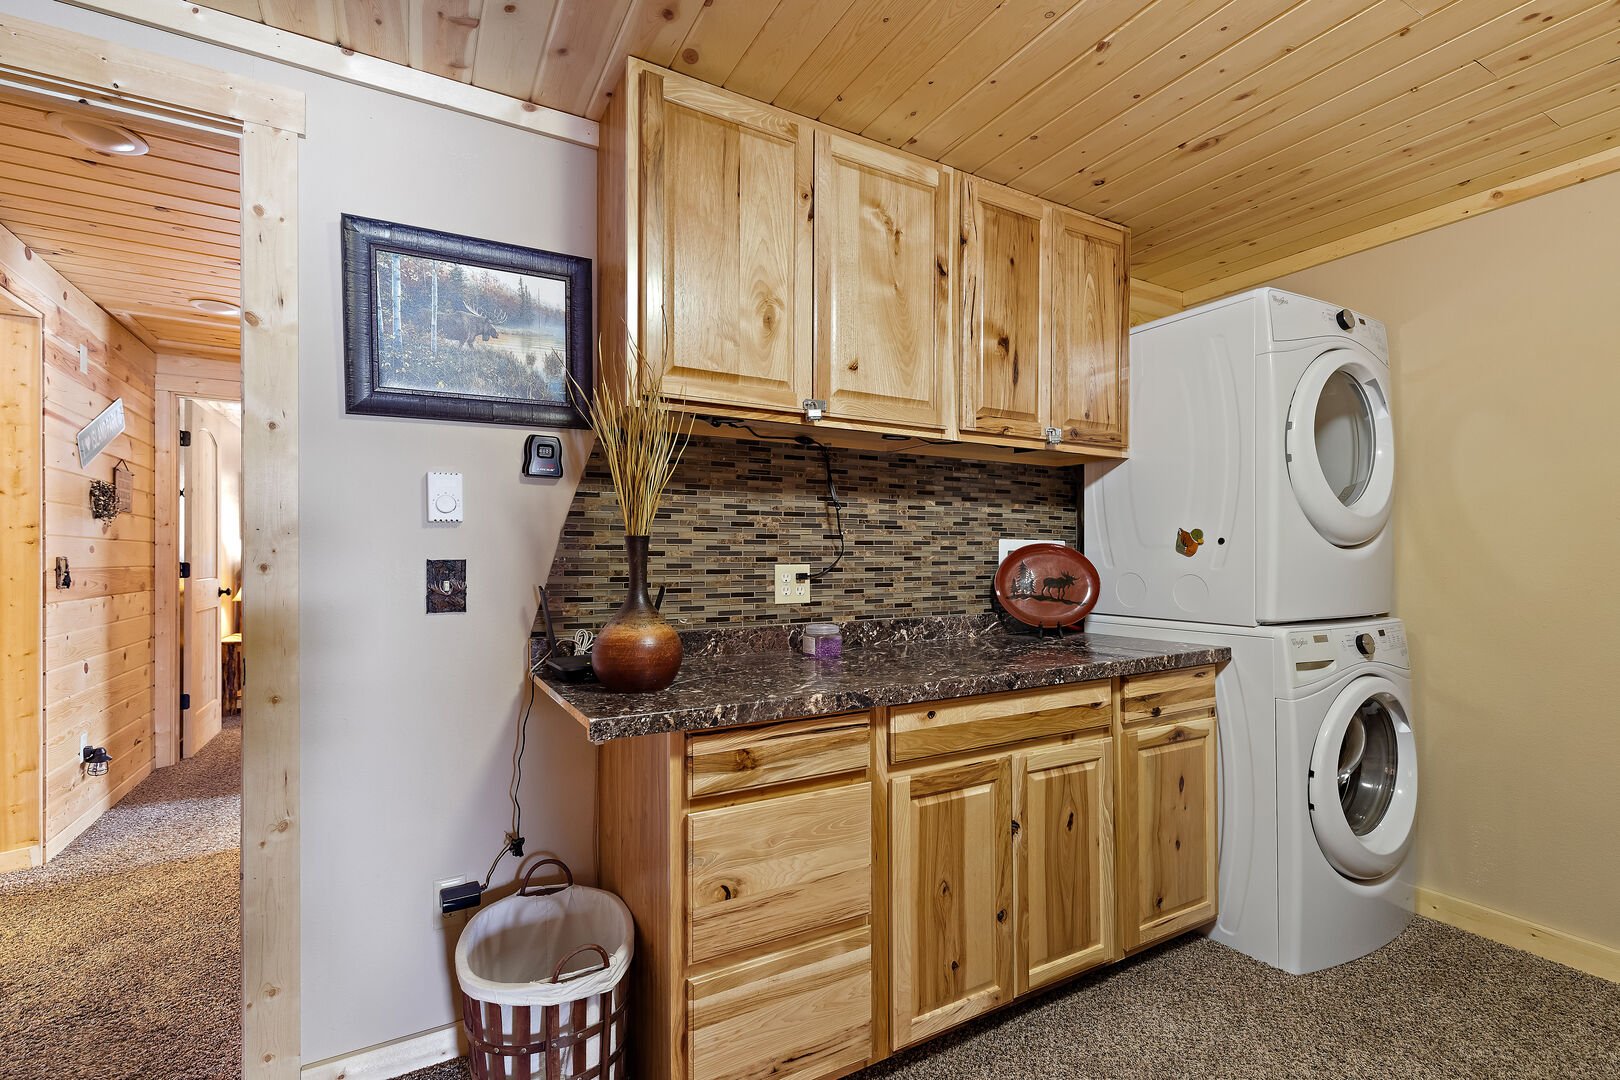 Huckleberry Hollow ~ bedroom #3 / laundry room w/ queen over queen bunk bed and ONLY ACCESS TO ROOM #4